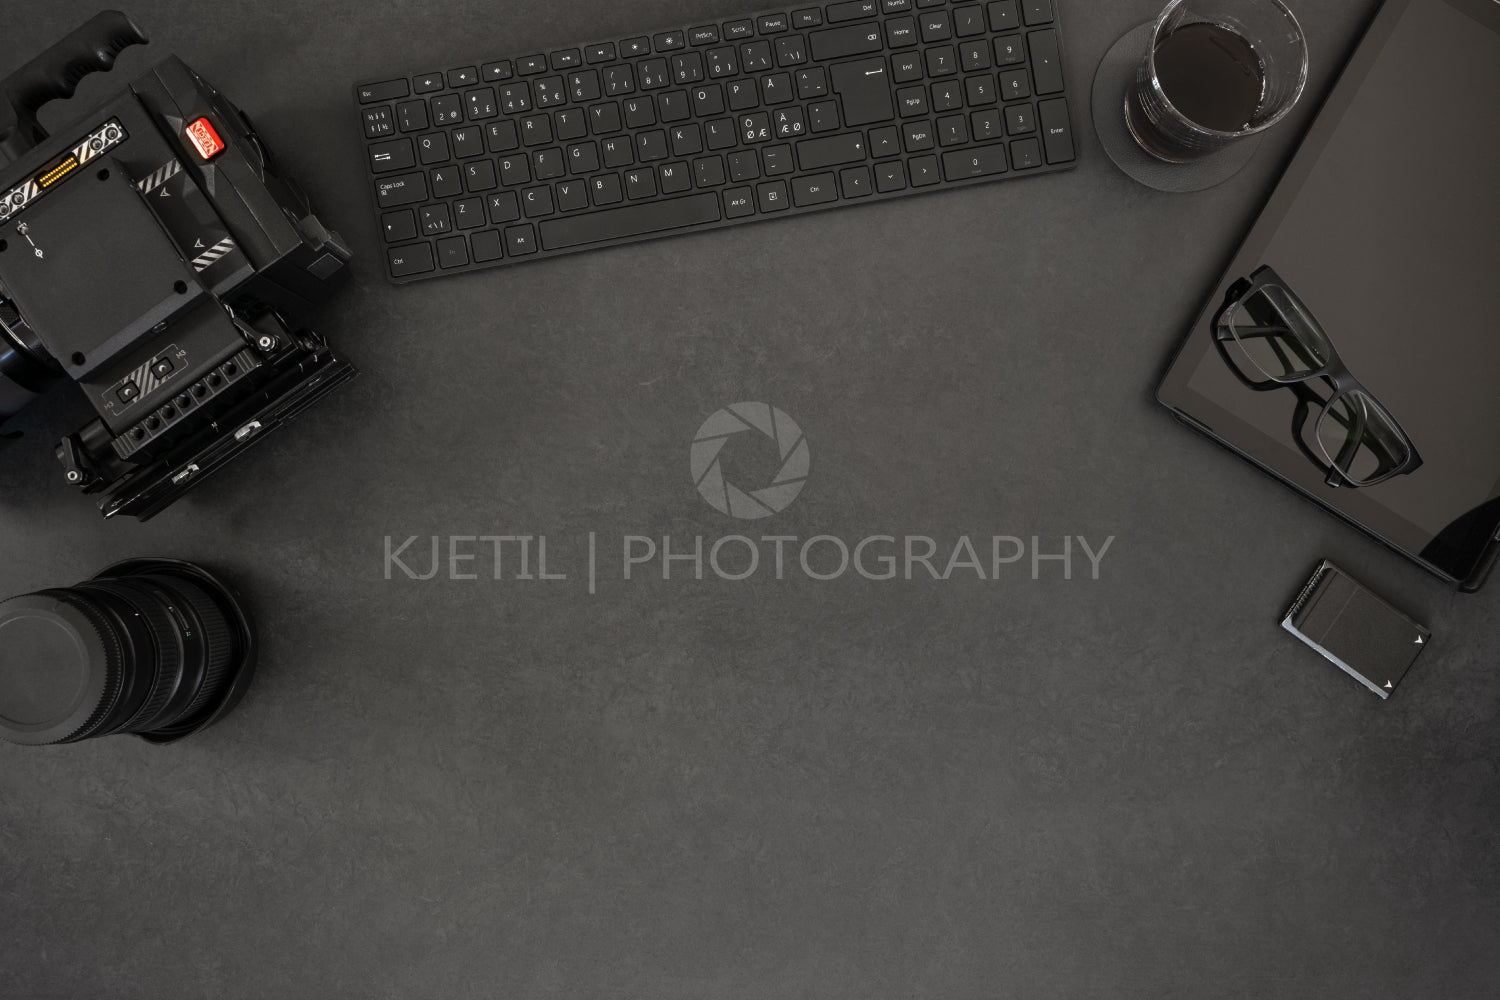 Directly above shot of computer and photographic equipment on table